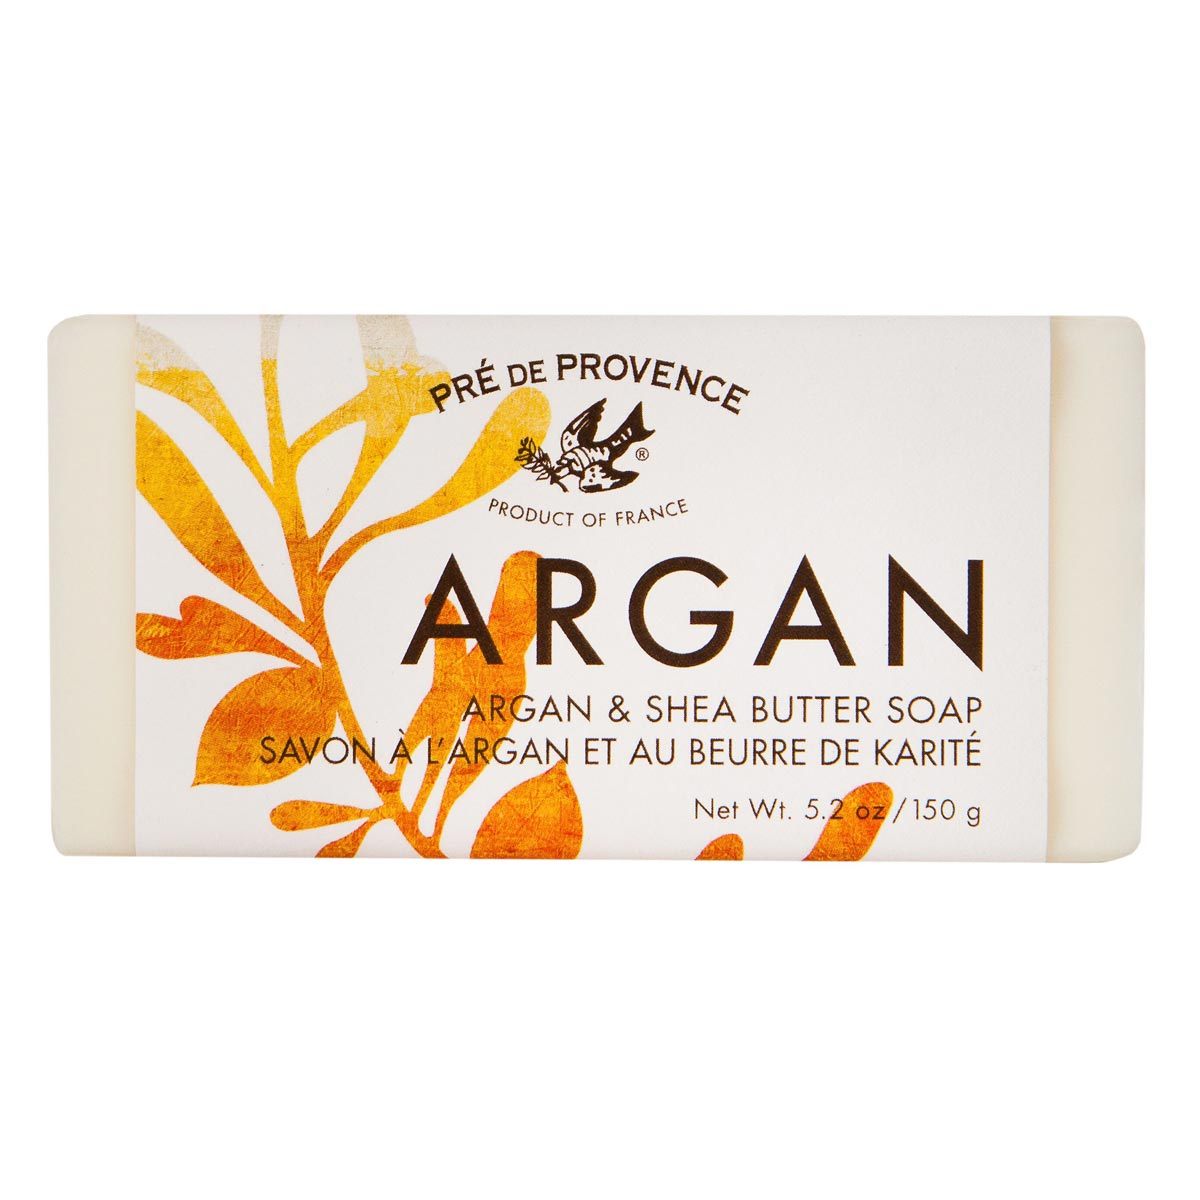 Primary image of Argan and Shea Butter Soap